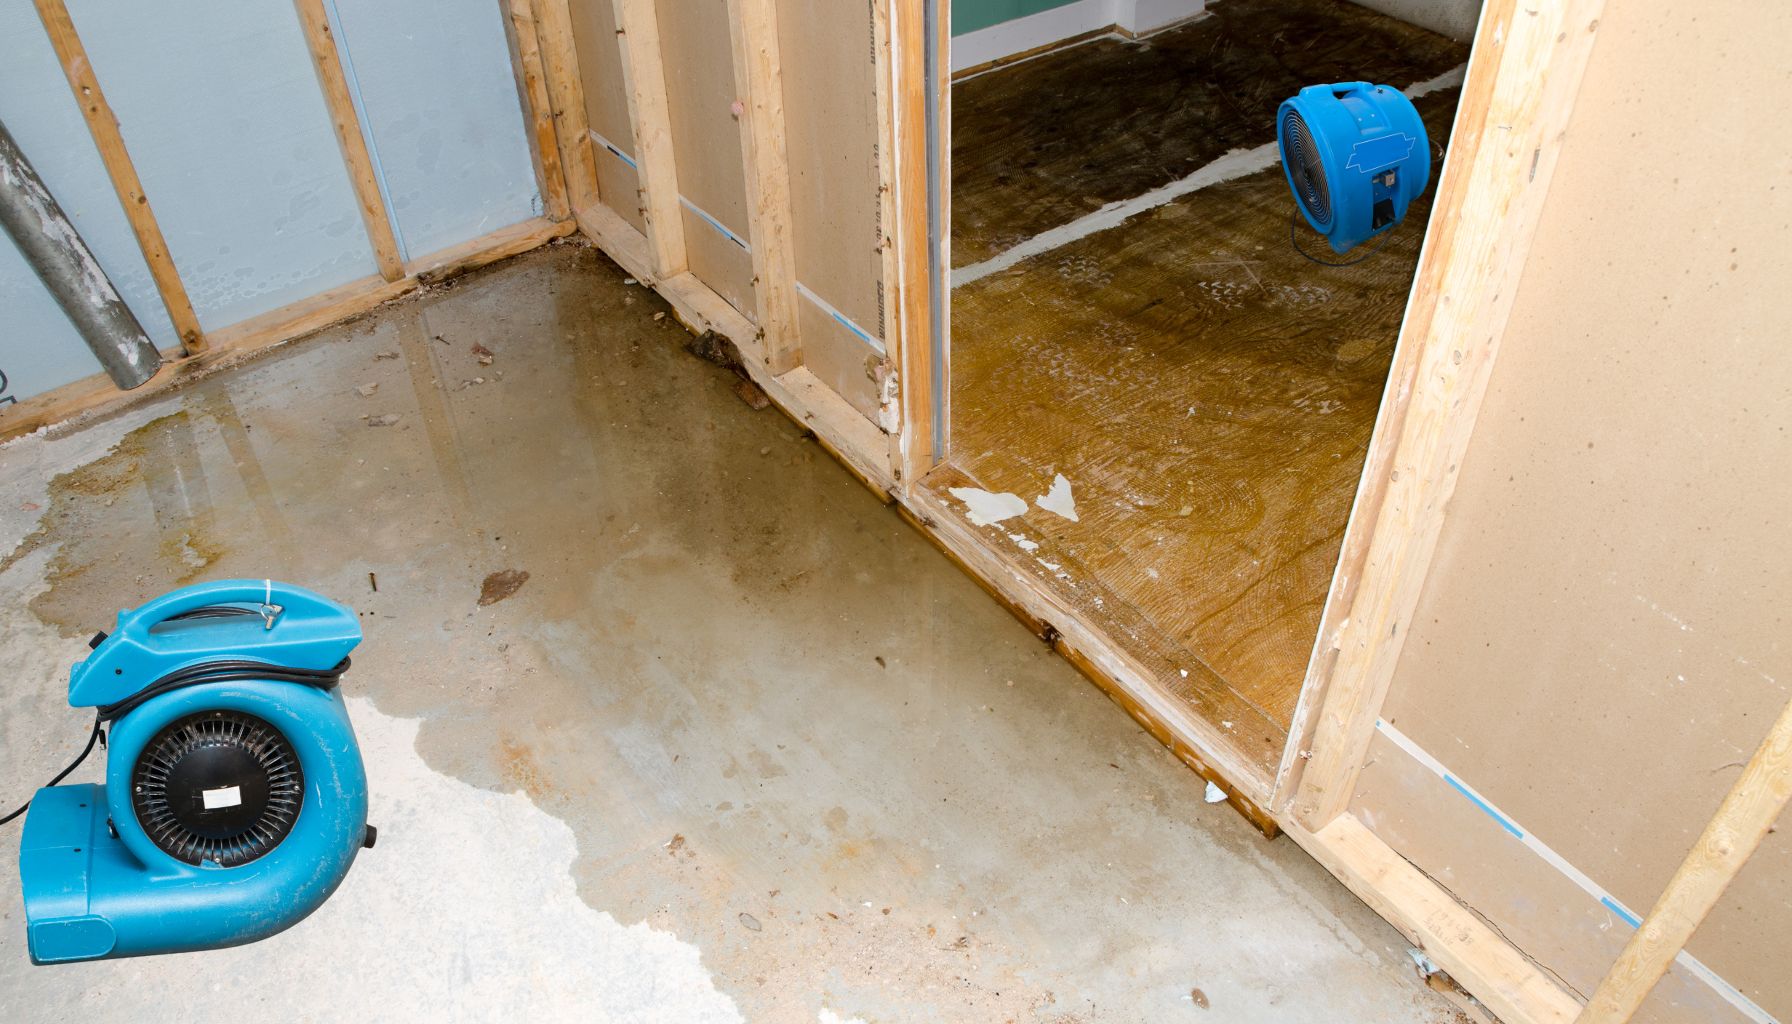 A room with partially constructed walls and a wet concrete floor shows clear signs of water damage restoration. Two blue fans are placed on the ground to help dry the area. A door leads to another room undergoing a similar restoration process. -PureOneServices